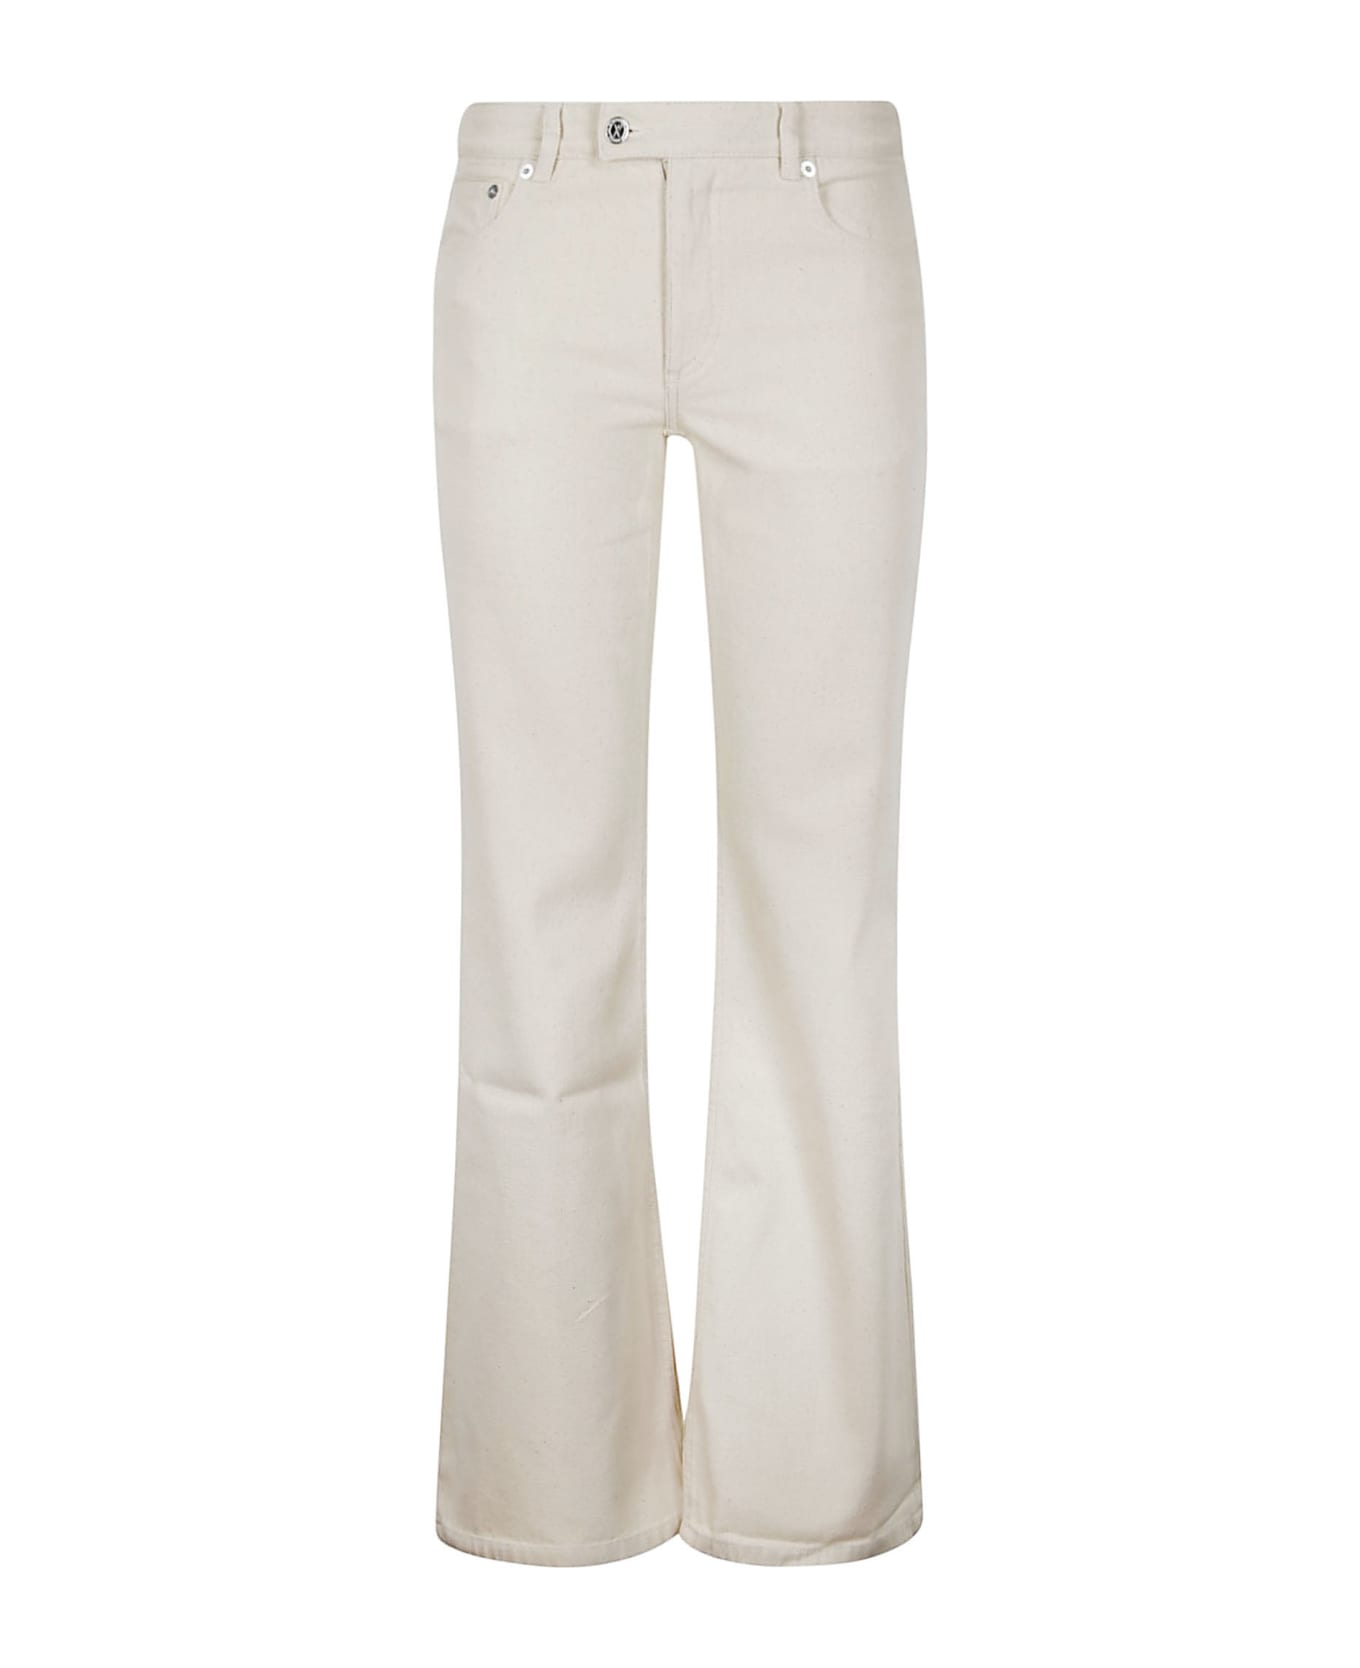 A.P.C. 'is'' Jeans - BEIGE